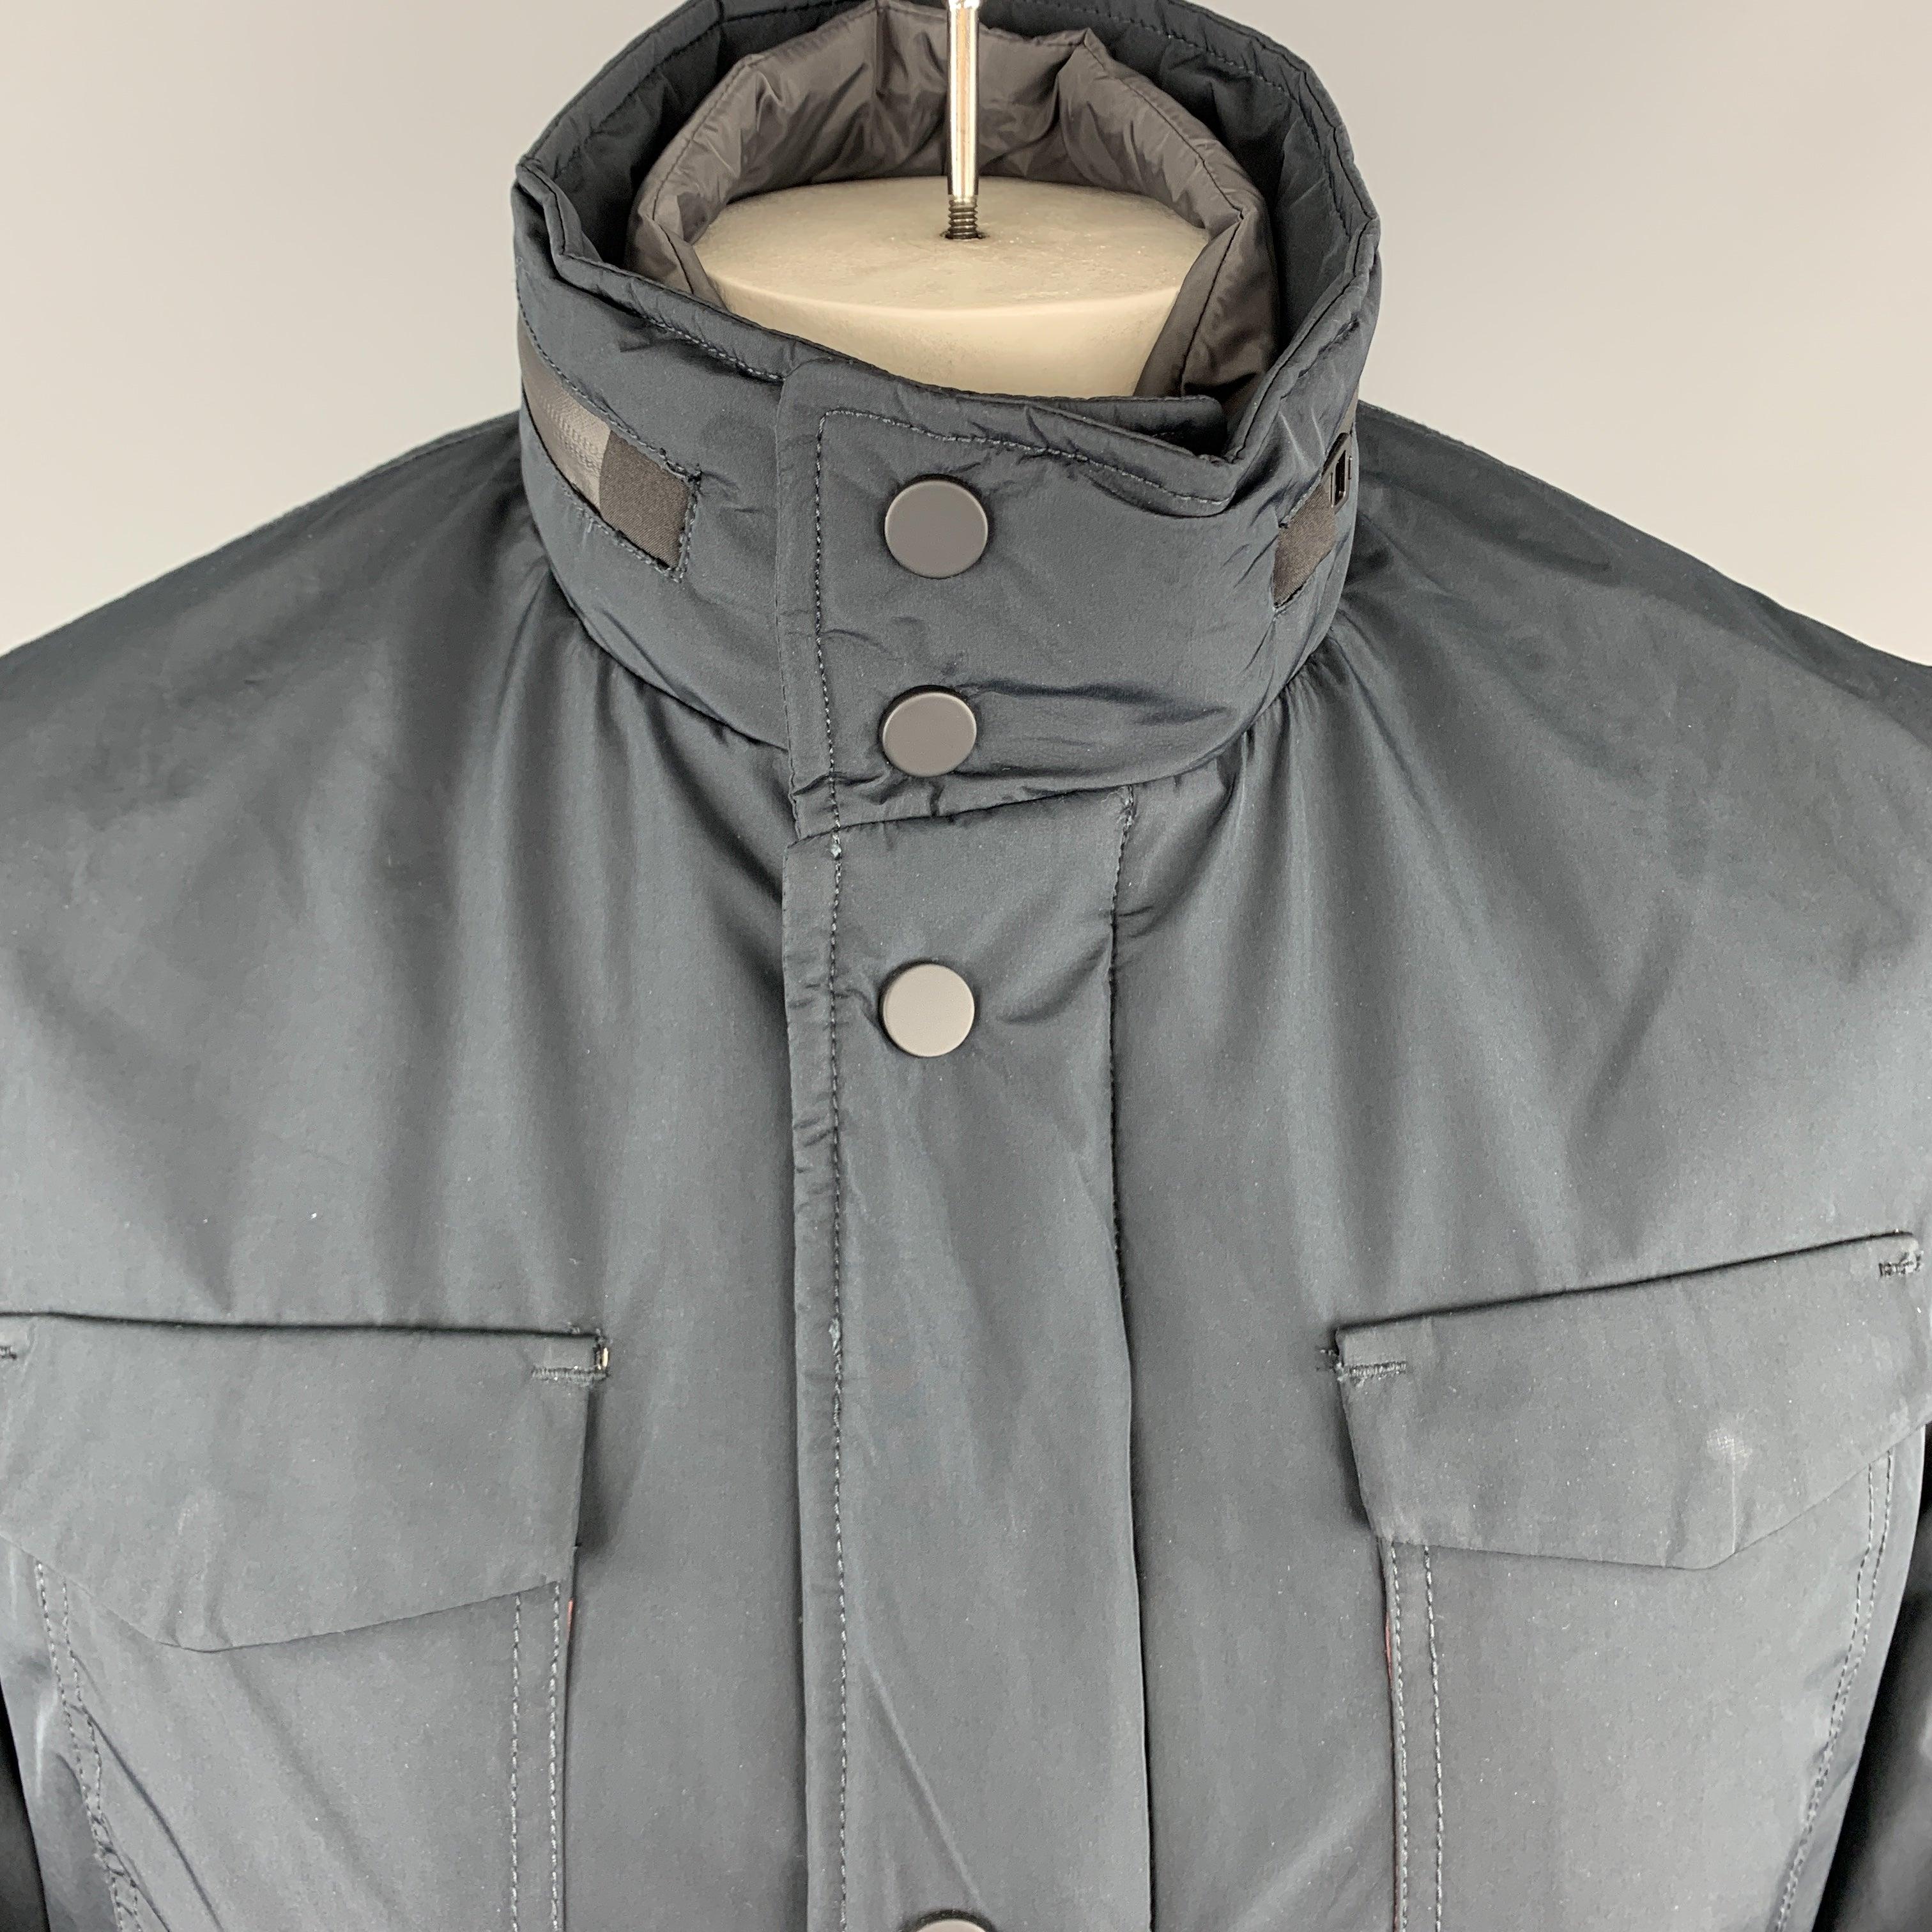 EREDI PISANO jacket comes in a navy waterproof fabric with a zip up snap placket closure, patch flap pockets, waterproof zippers, high collar with tight zip out hood, and detachable front panel. Made in Italy.New With Tags.  

Marked:   50